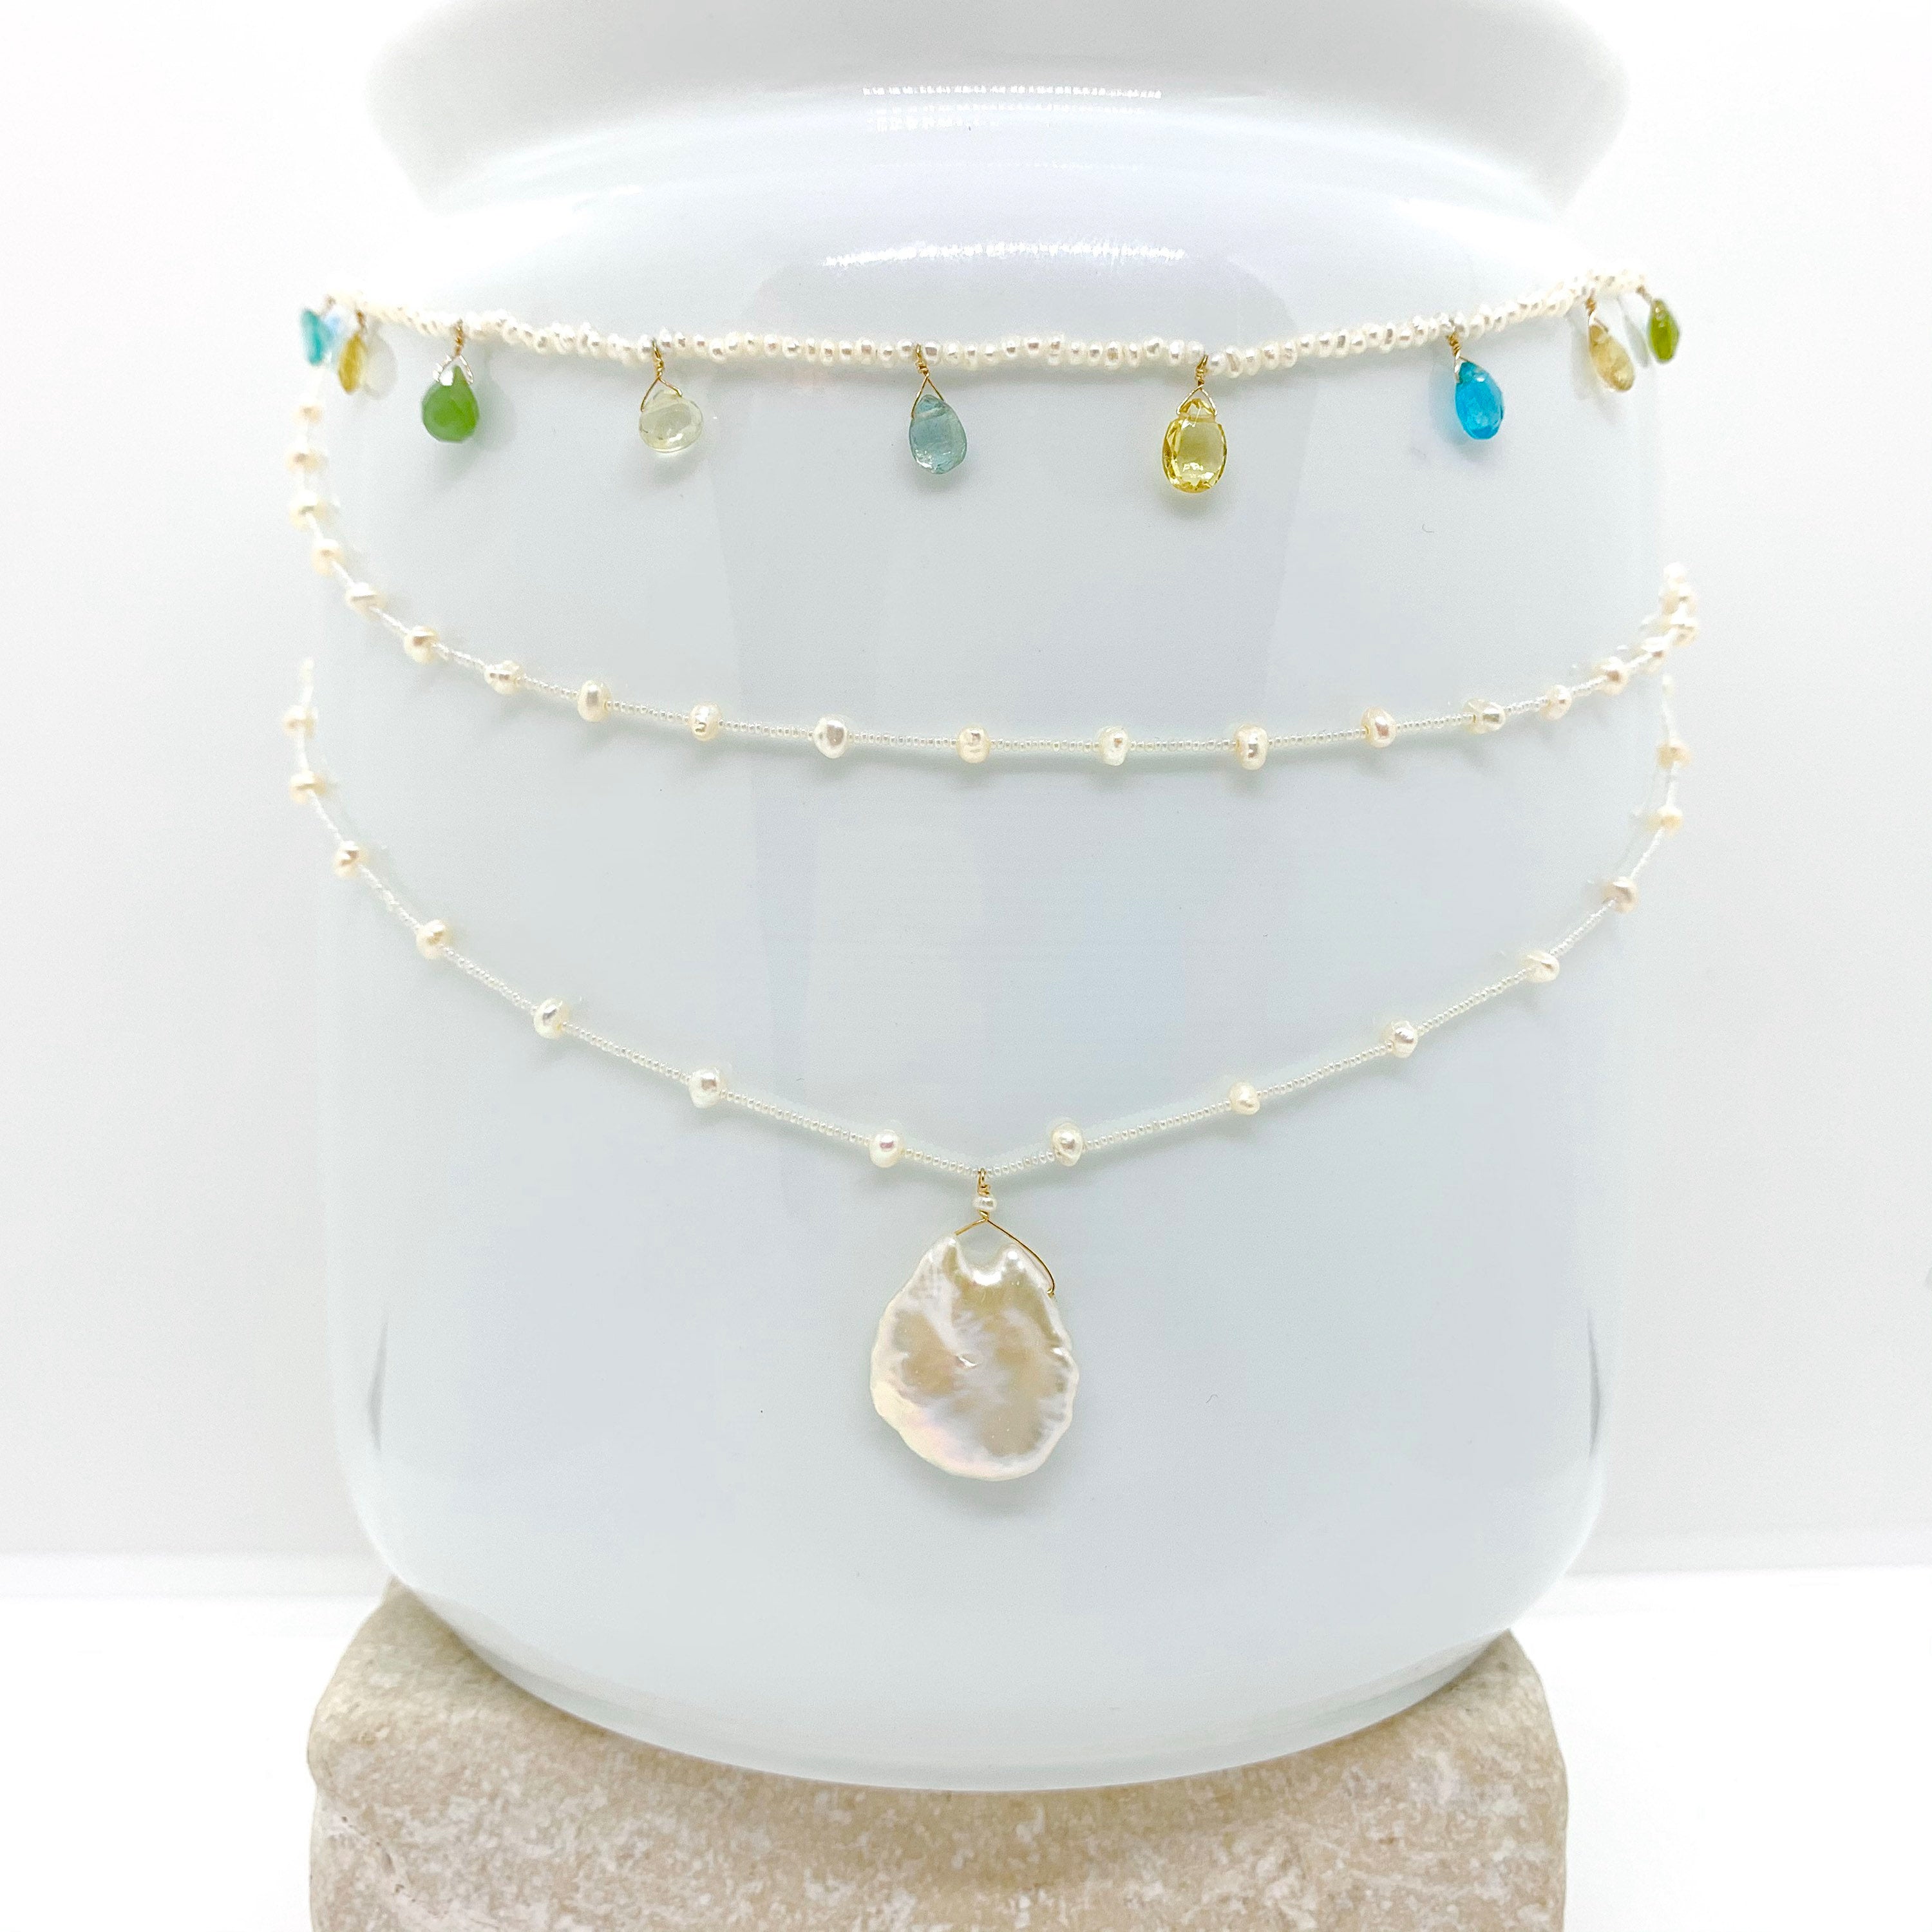 14k Gold Chain Necklace w/ Freshwater Pearls & Antique Italian Beads